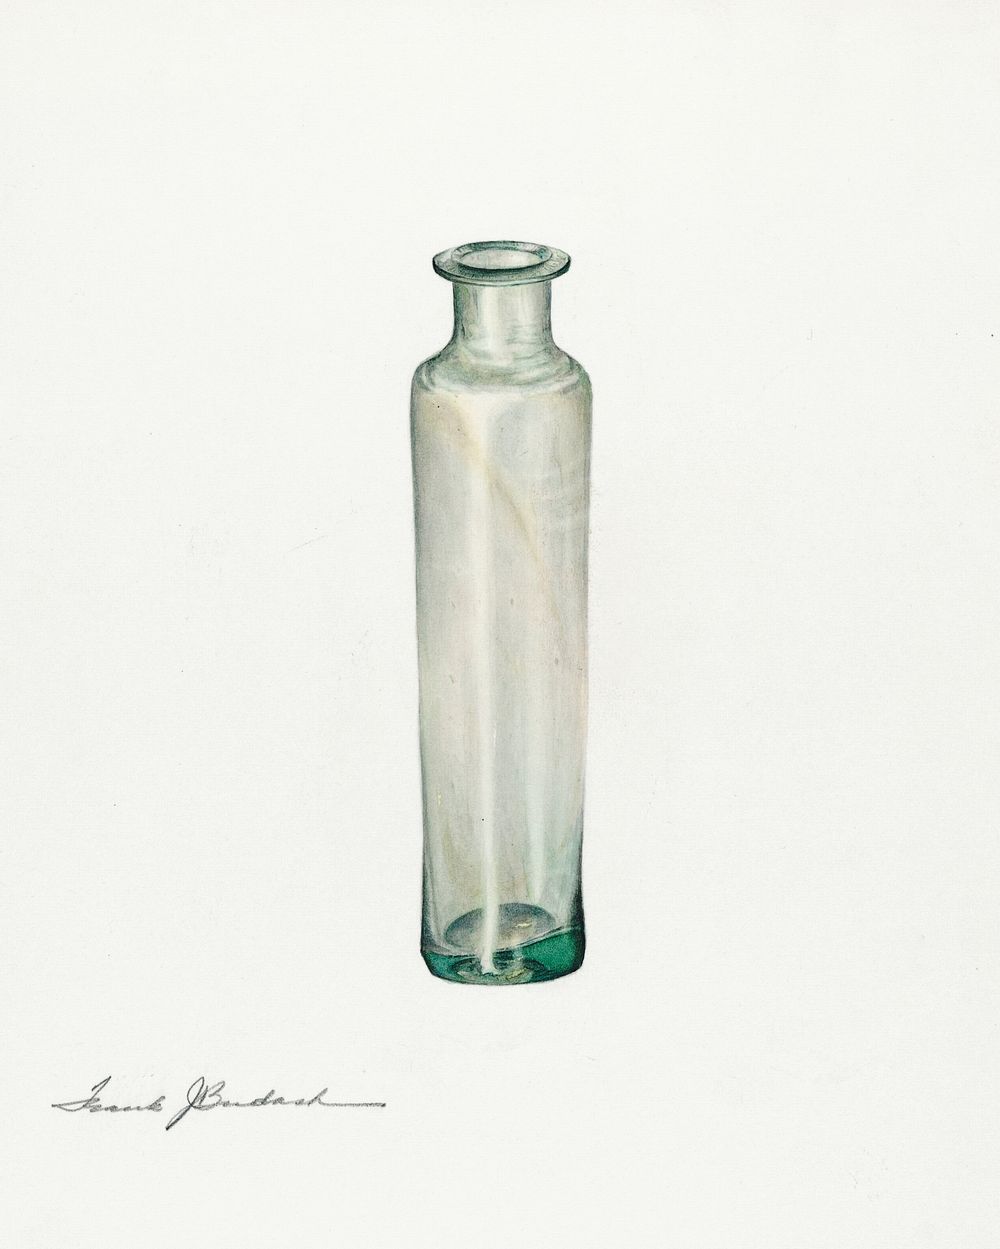 Medicine Bottle (ca. 1938) by Frank Budash. Original from The National Gallery of Art. Digitally enhanced by rawpixel.